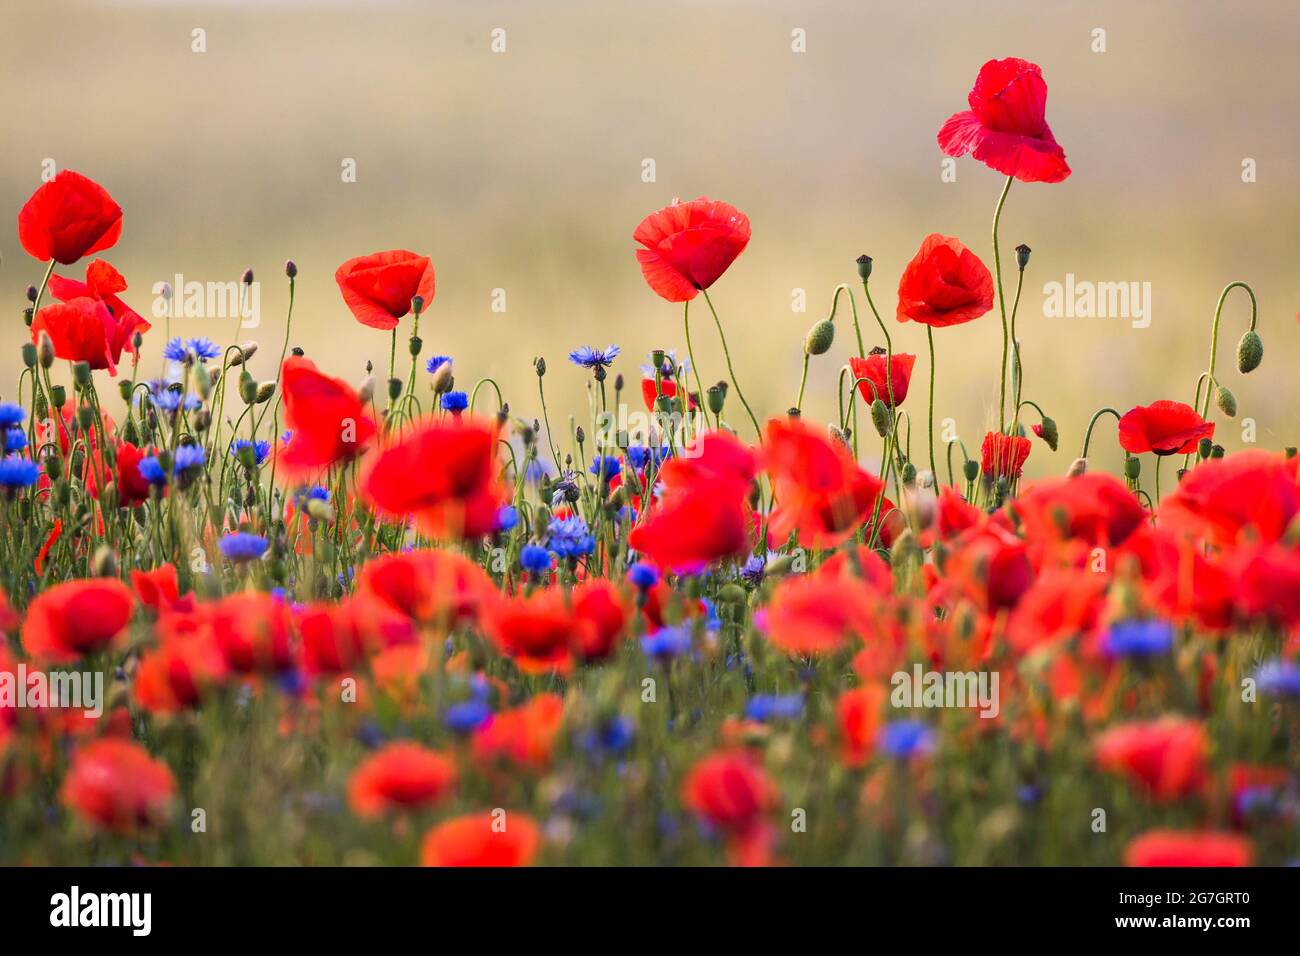 Common poppy, Corn poppy, Red poppy (Papaver rhoeas), poppies and corn flowers in a grain field, Germany, Usedom Stock Photo